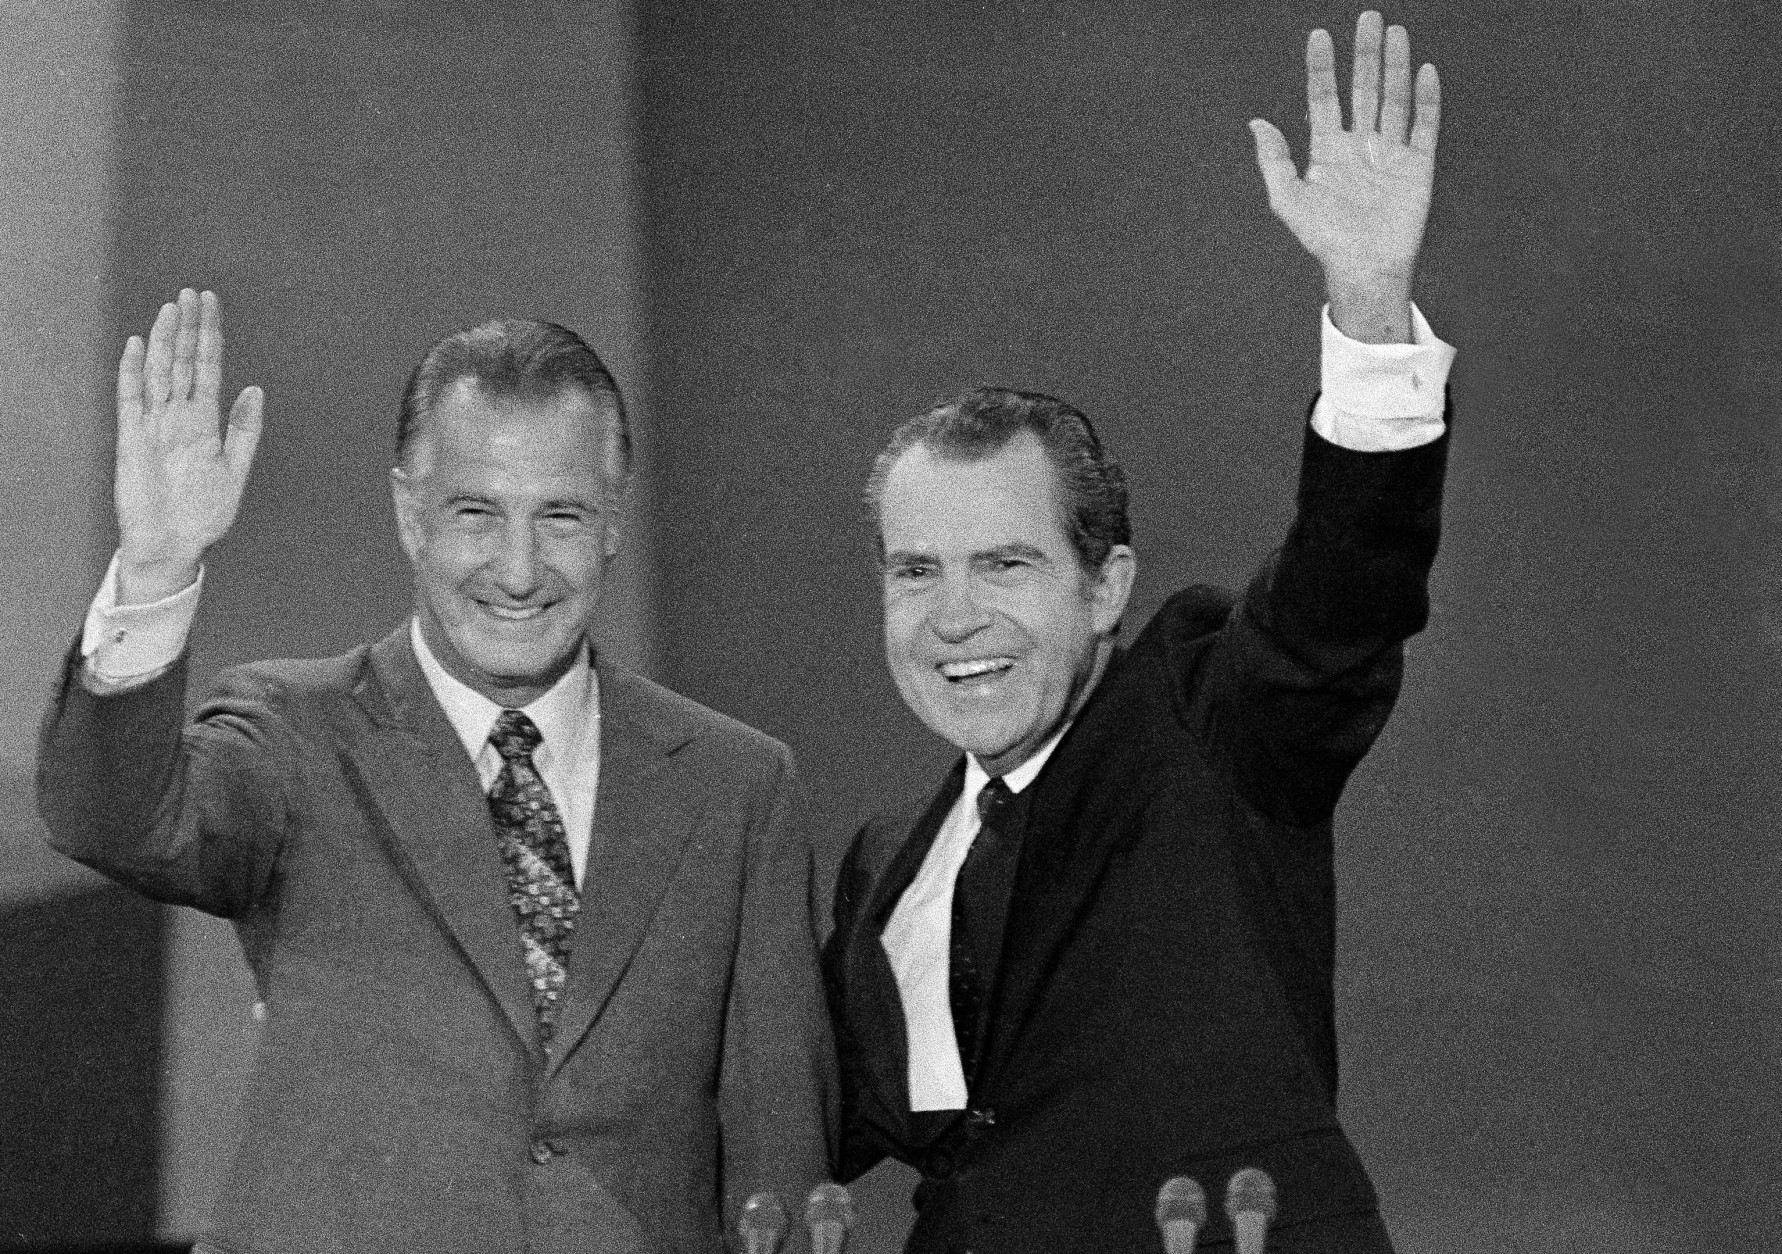 U.S. President Richard M. Nixon, right, and Vice-president Spiro T. Agnew wave to the Republican National Convention delegates in Miami, Fla., Aug. 23, 1972, who nominated them to run for re-election. (AP Photo)